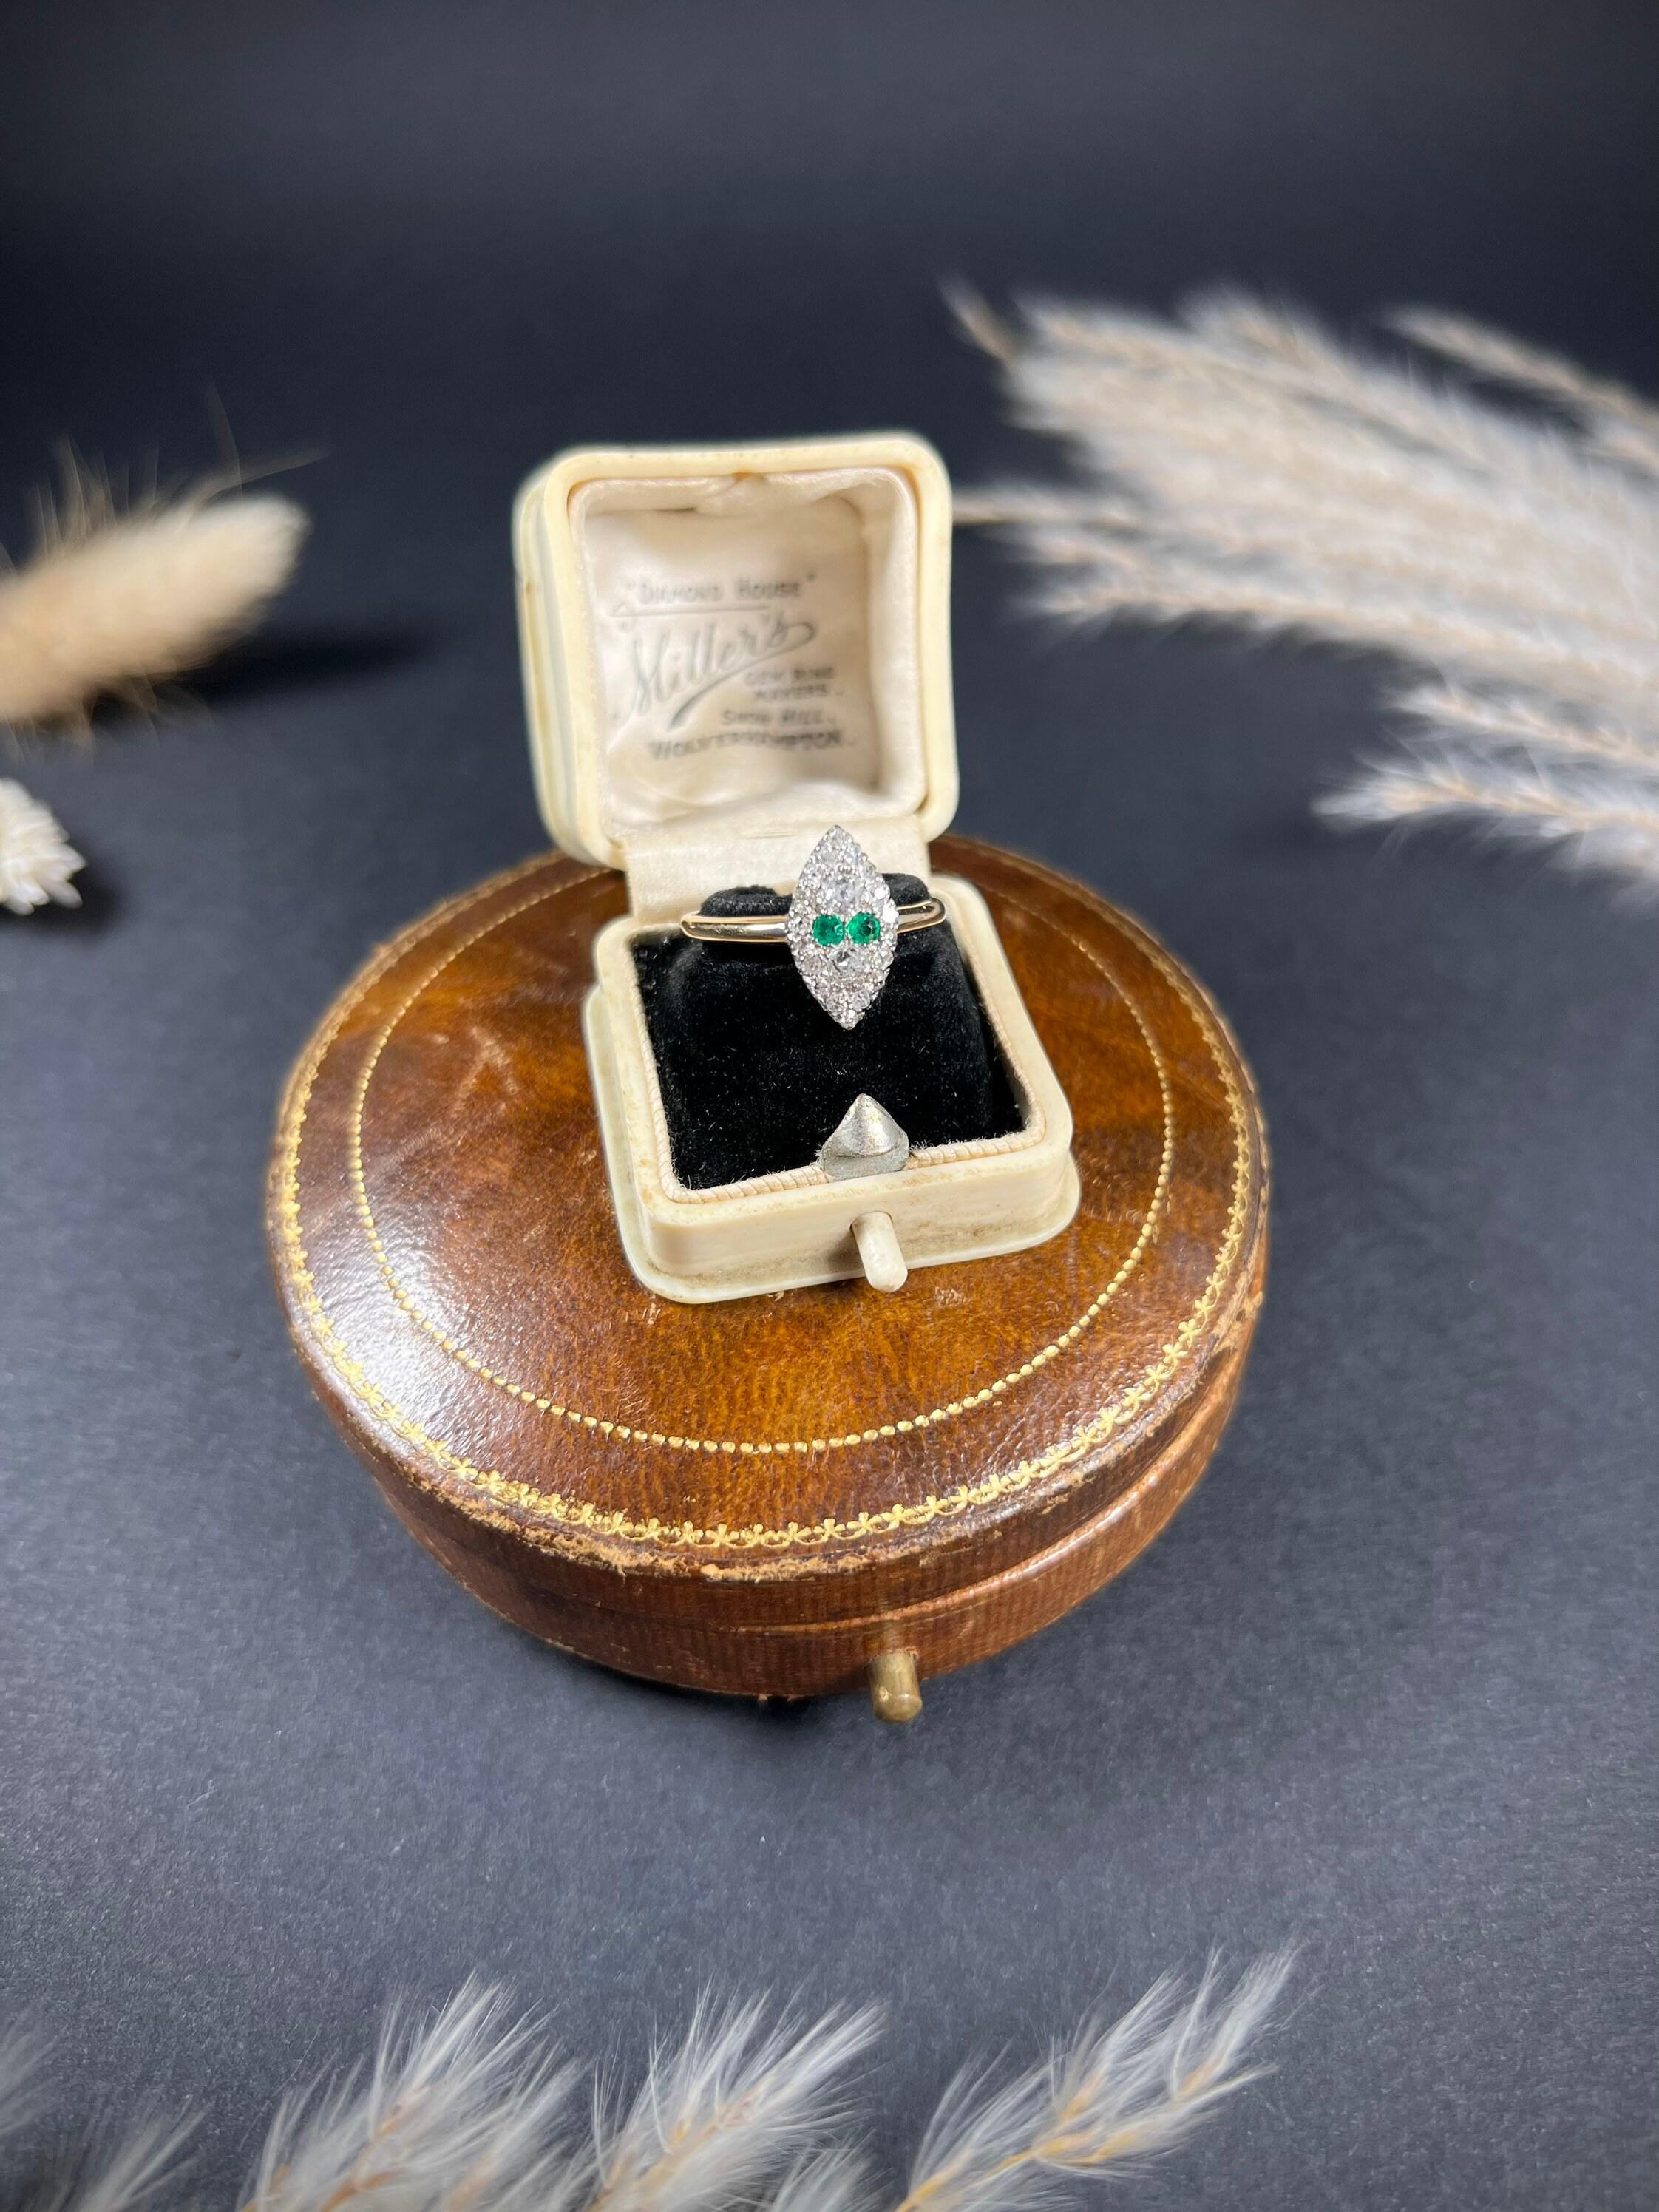 Antique Emerald Marquise Ring 

18ct Gold Stamped 

Hallmarked Chester 1903

Makers Mark A & R

Fabulous, Edwardian marquise/navette shaped ring. Set with two gorgeous, natural emeralds & two sparkling white diamonds to the centre. Framed